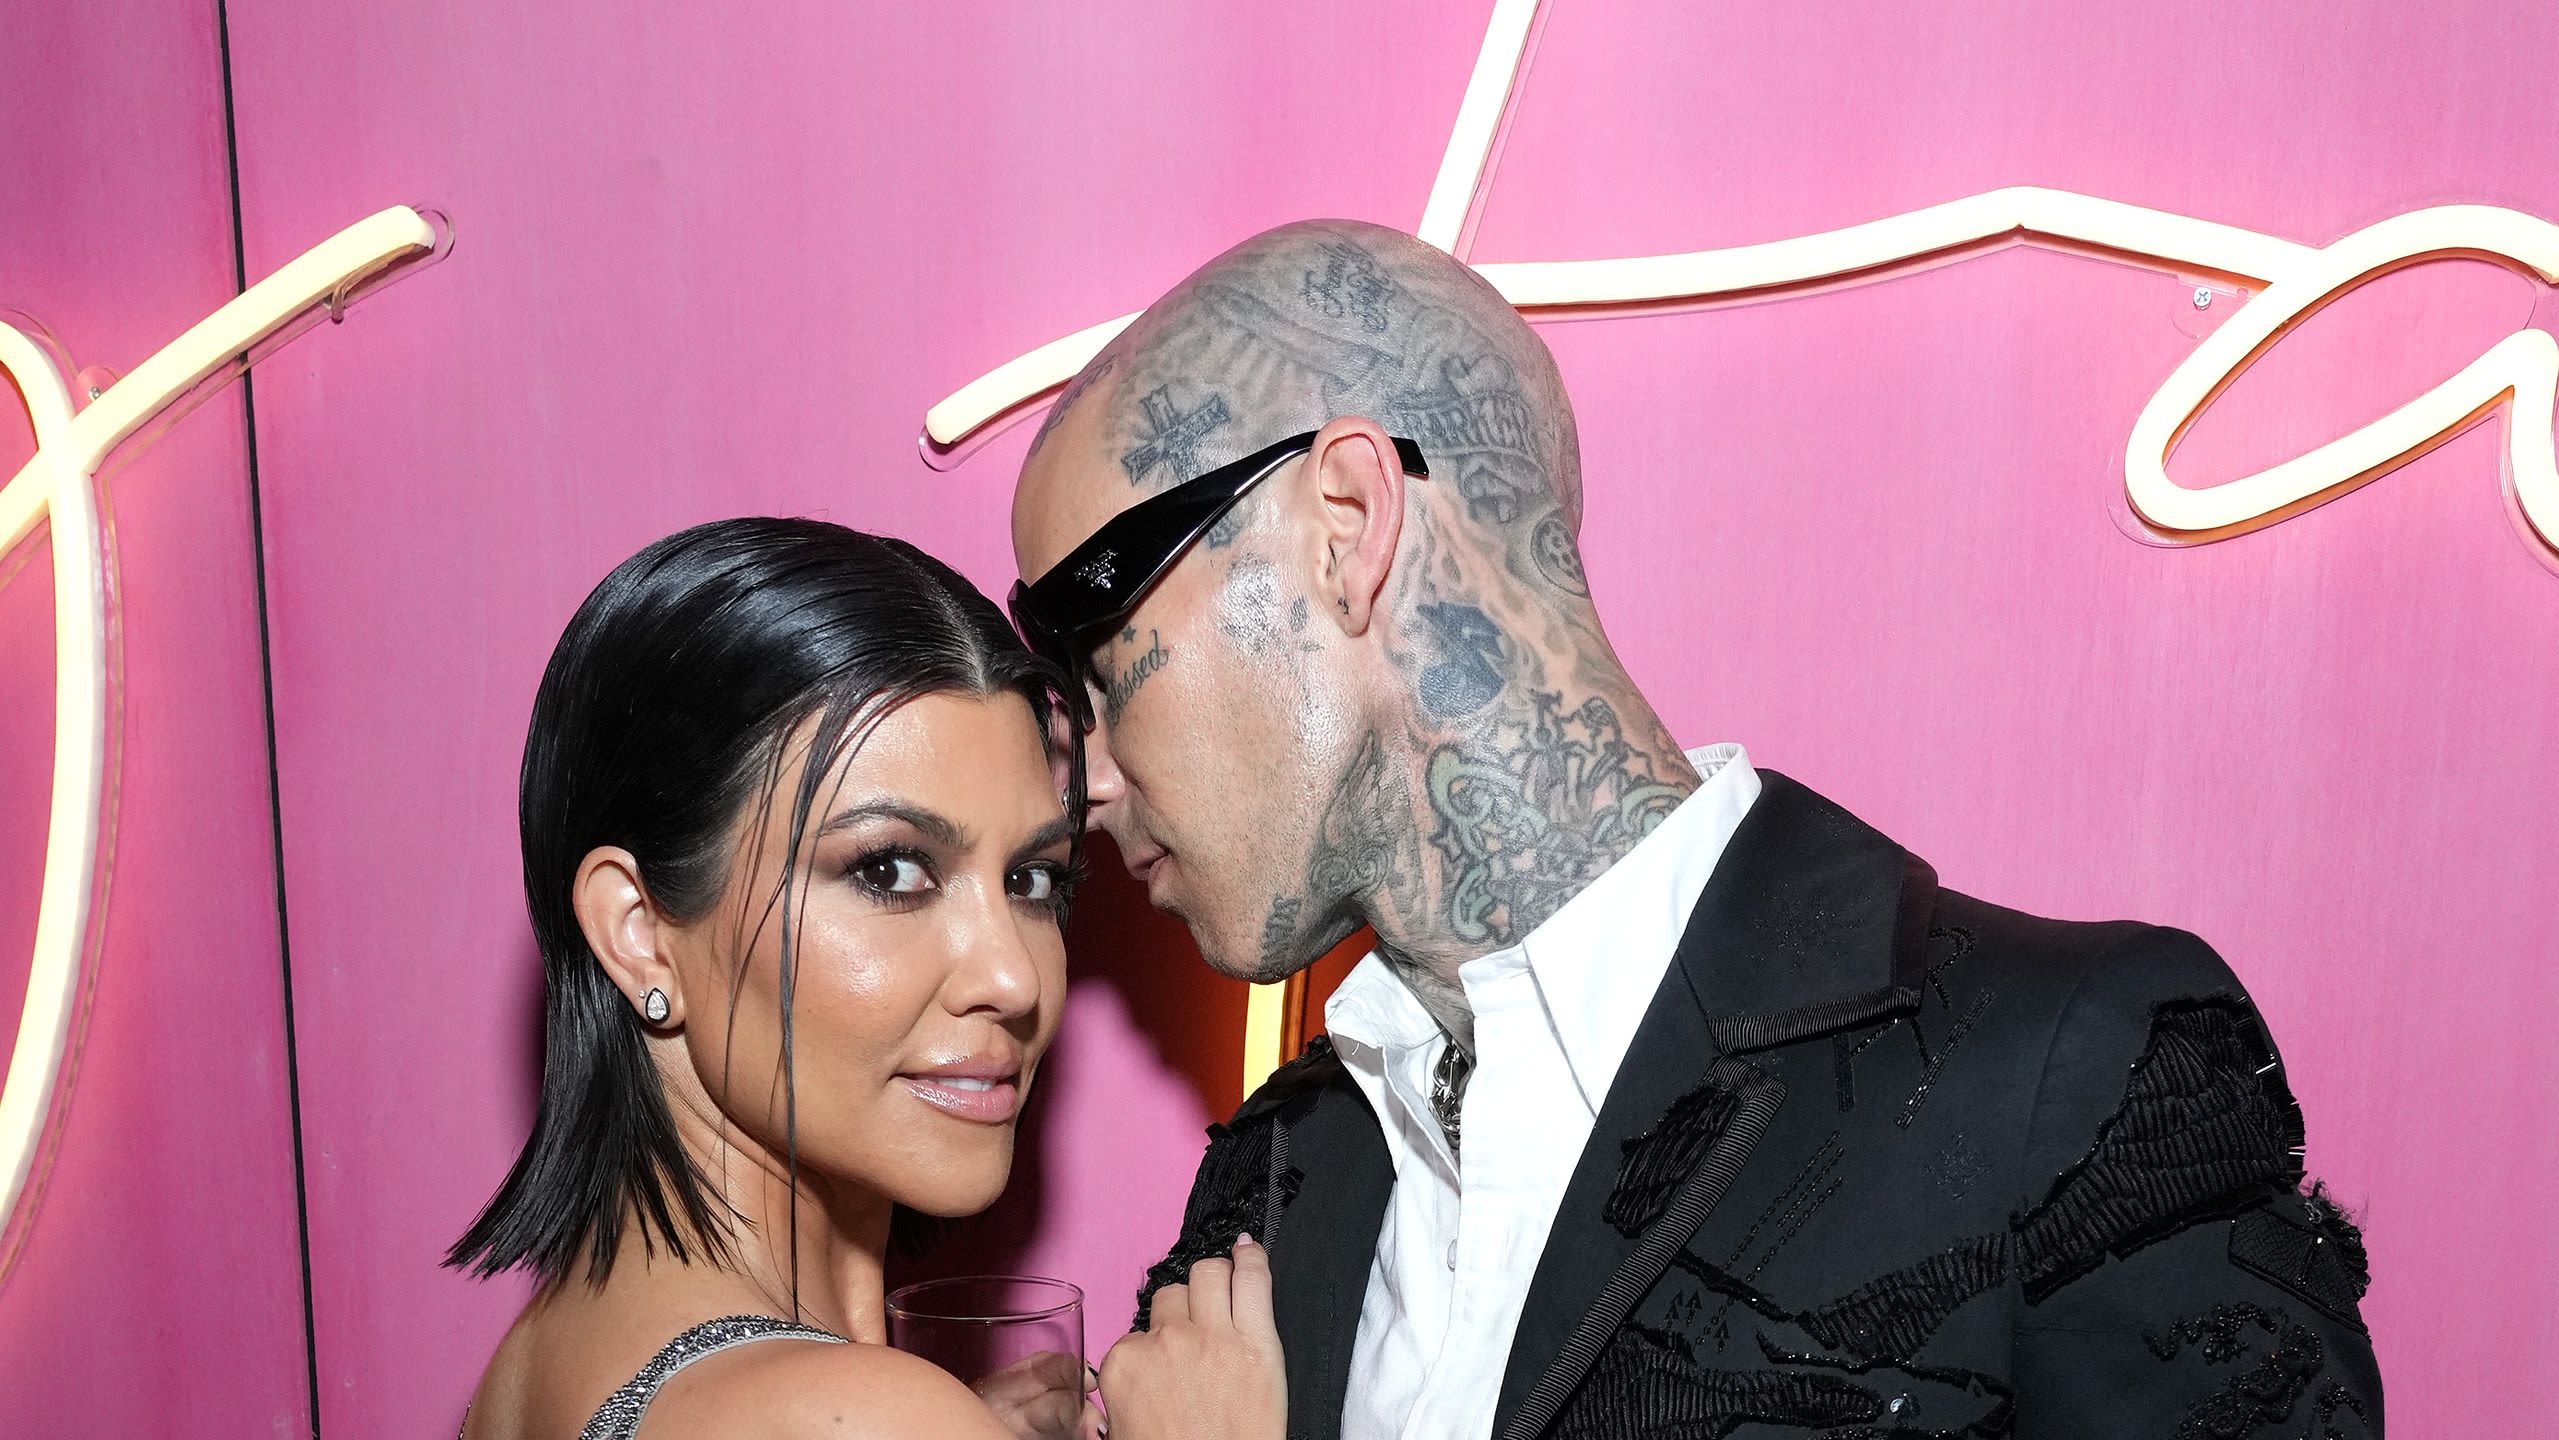 Travis Barker’s Mother’s Day Gift for Kourtney Kardashian Is So Incredibly Extra